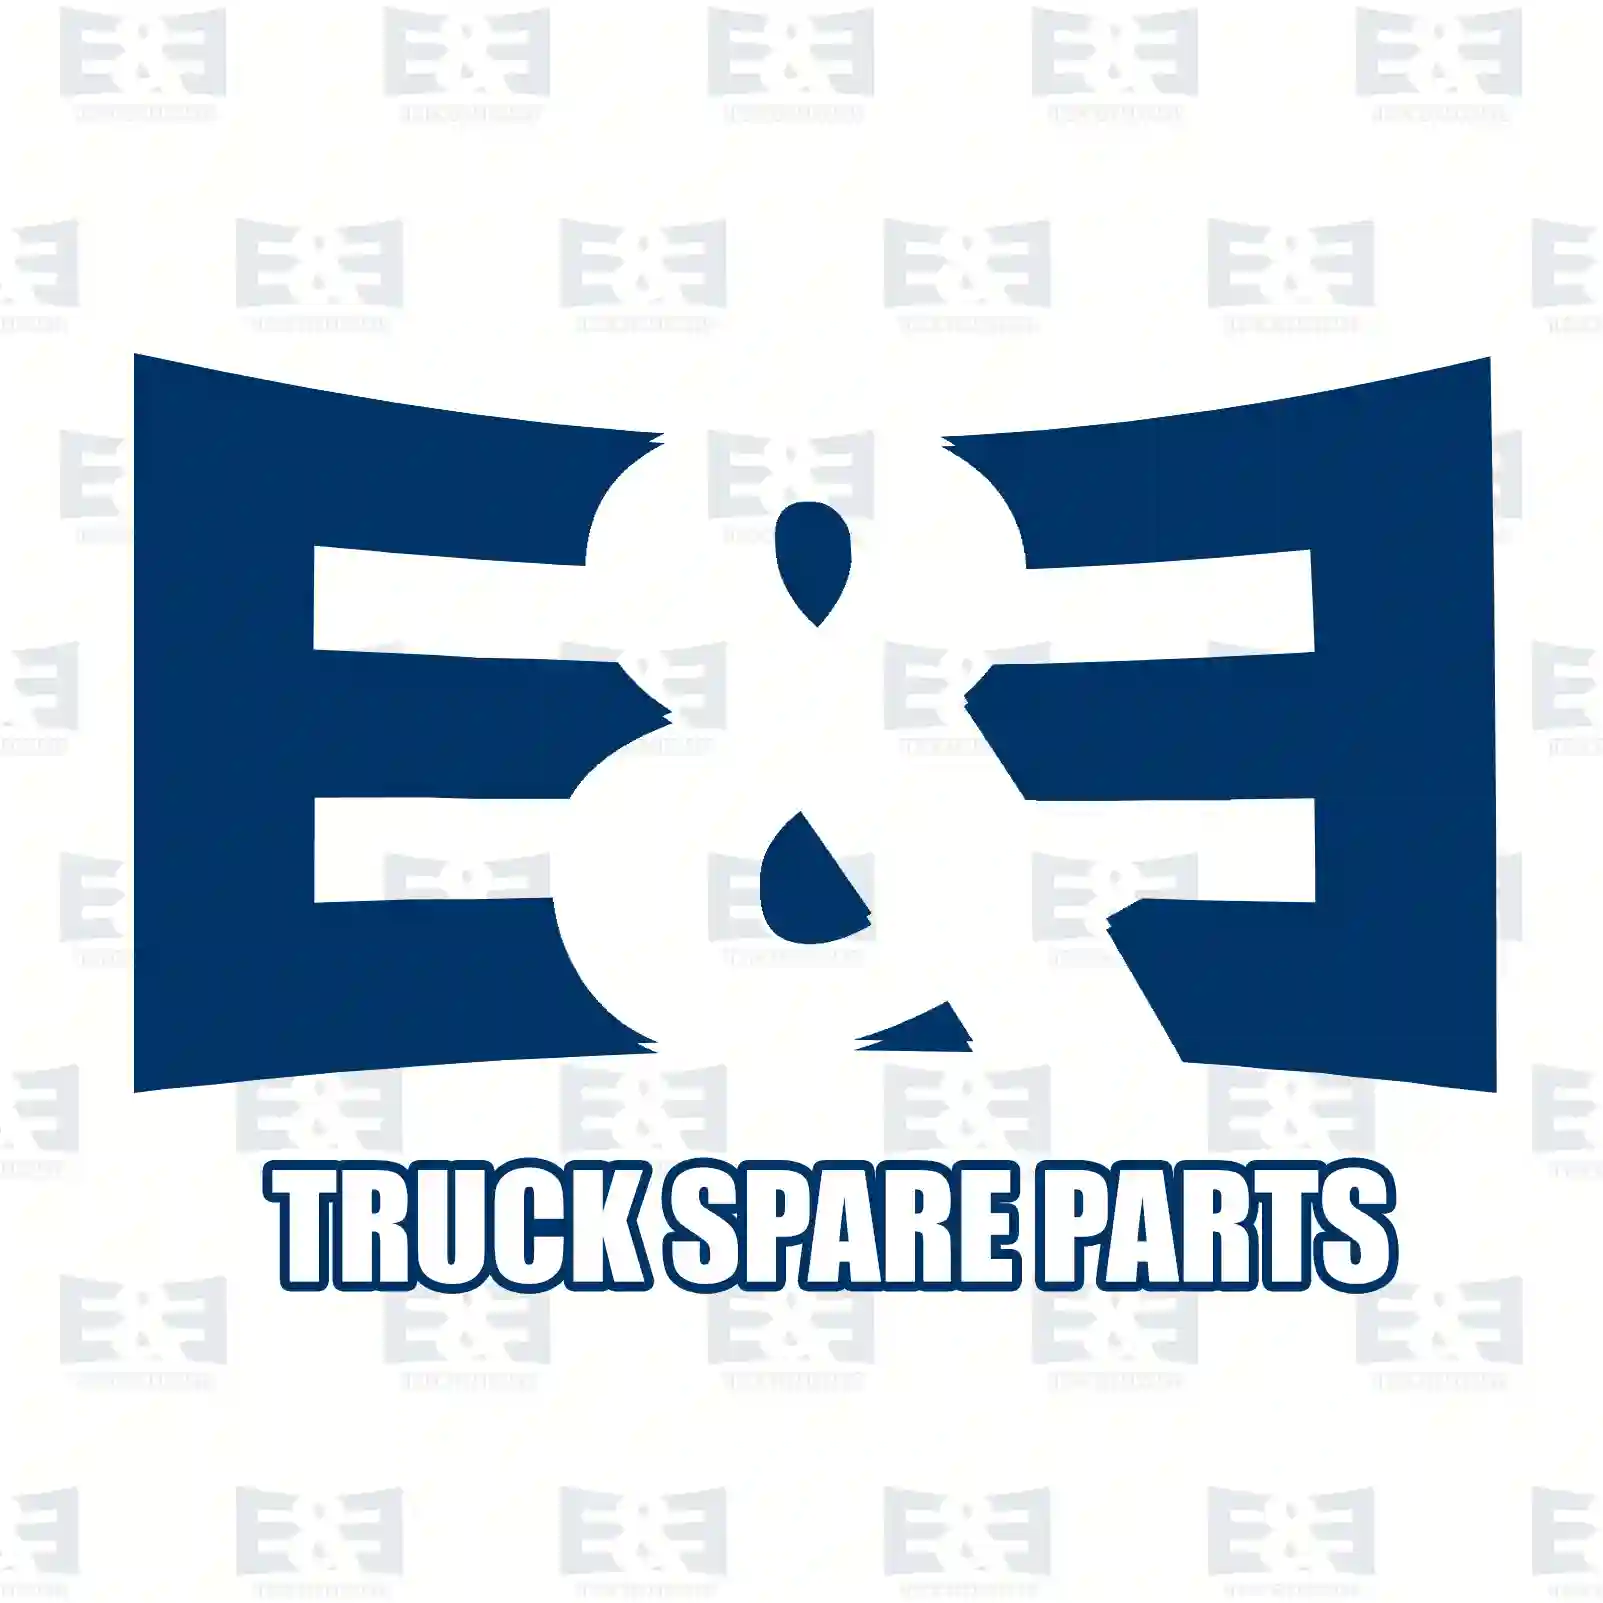  Wheel bearing unit, without accessories || E&E Truck Spare Parts | Truck Spare Parts, Auotomotive Spare Parts